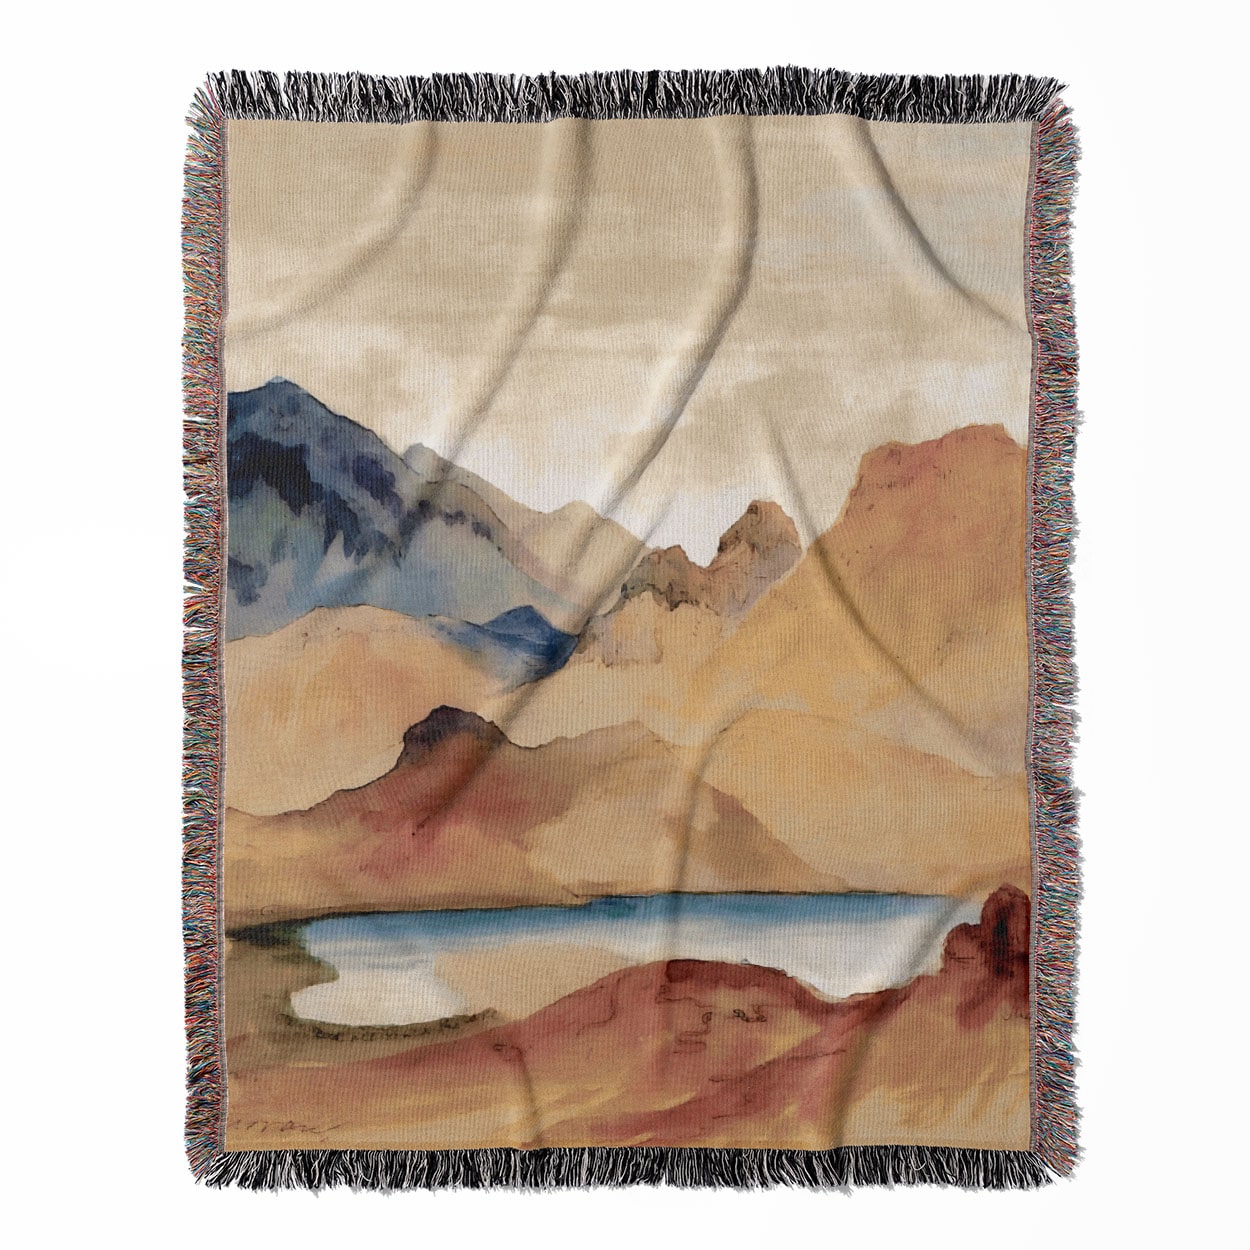 Abstract Mountains woven throw blanket, made with 100% cotton, providing a soft and cozy texture with landscapes for home decor.